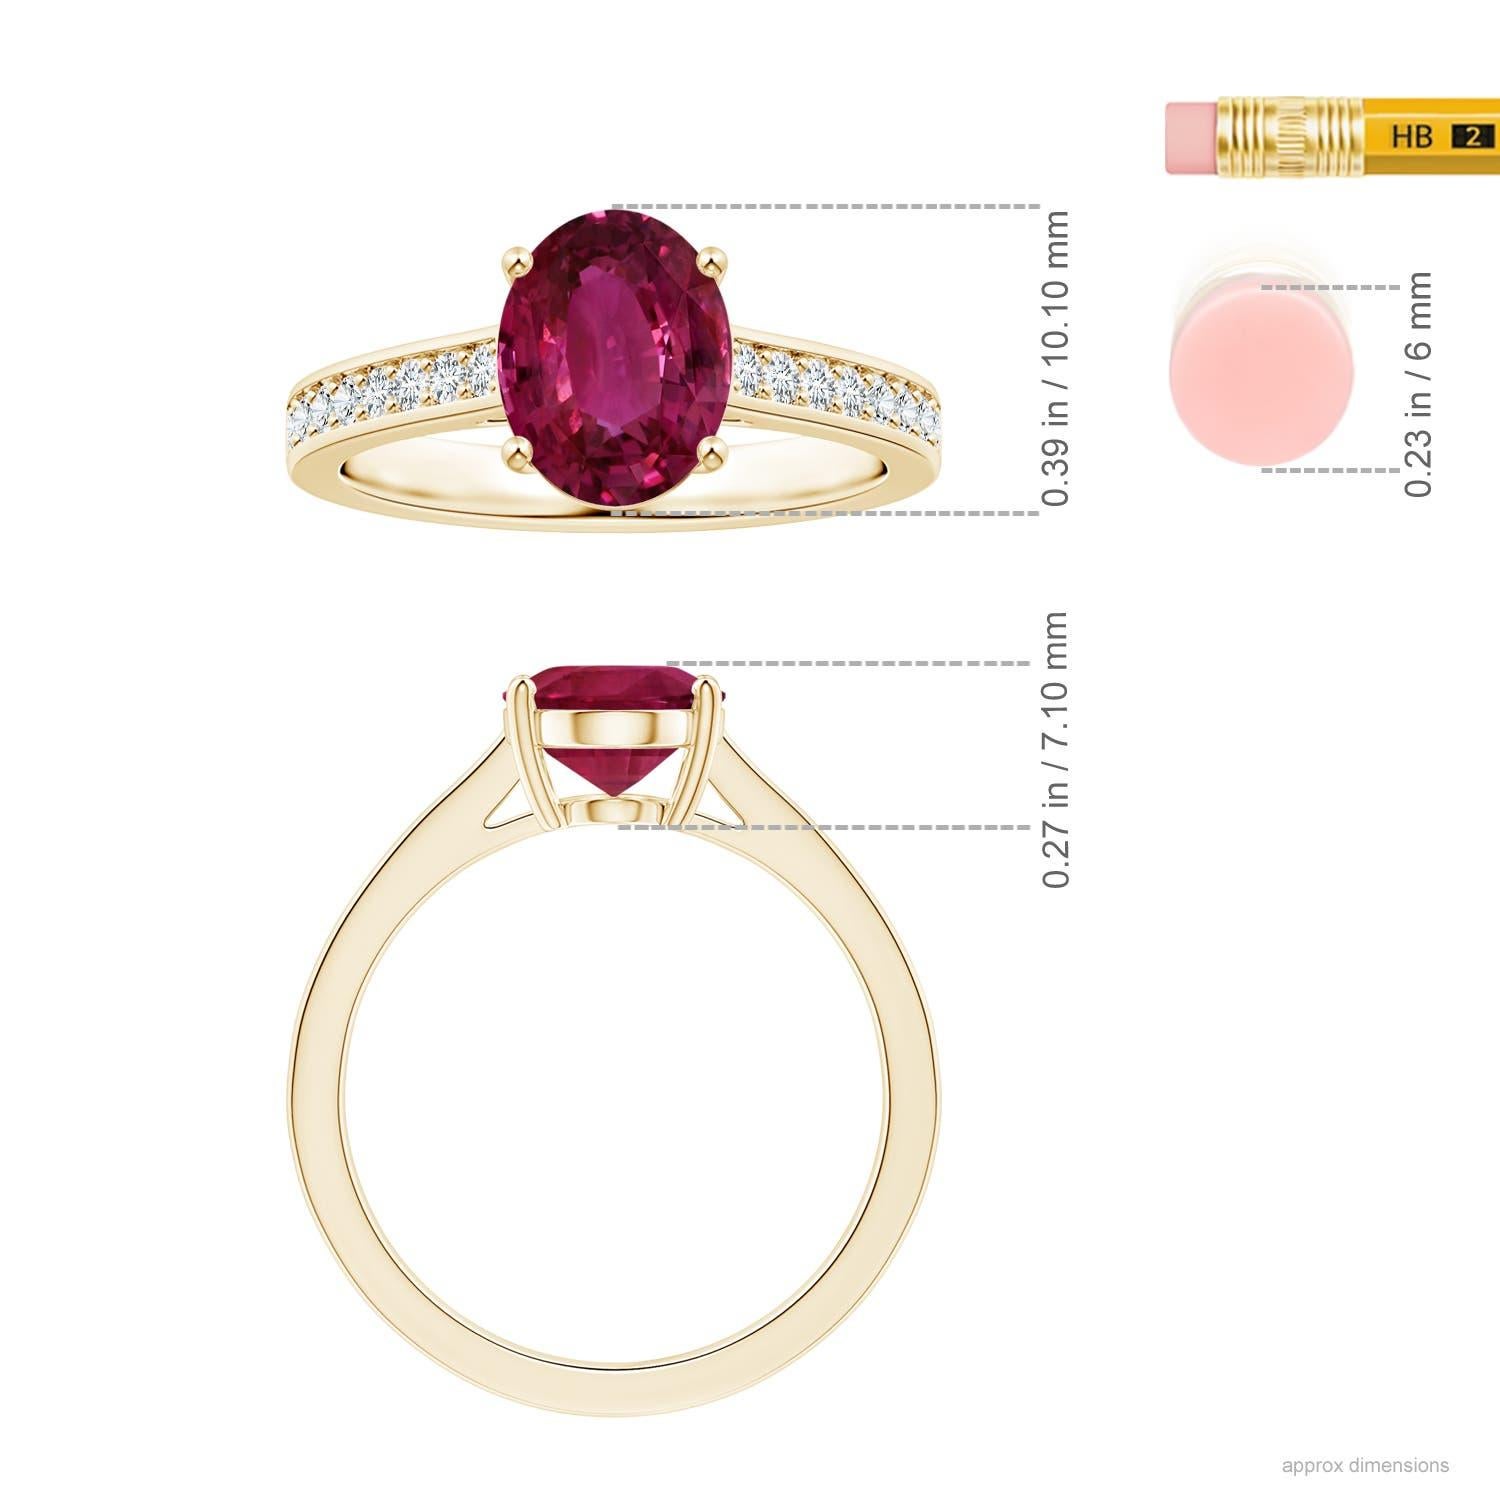 For Sale:  ANGARA Prong-Set GIA Certified Pink Sapphire Ring in Yellow Gold with Diamonds 5